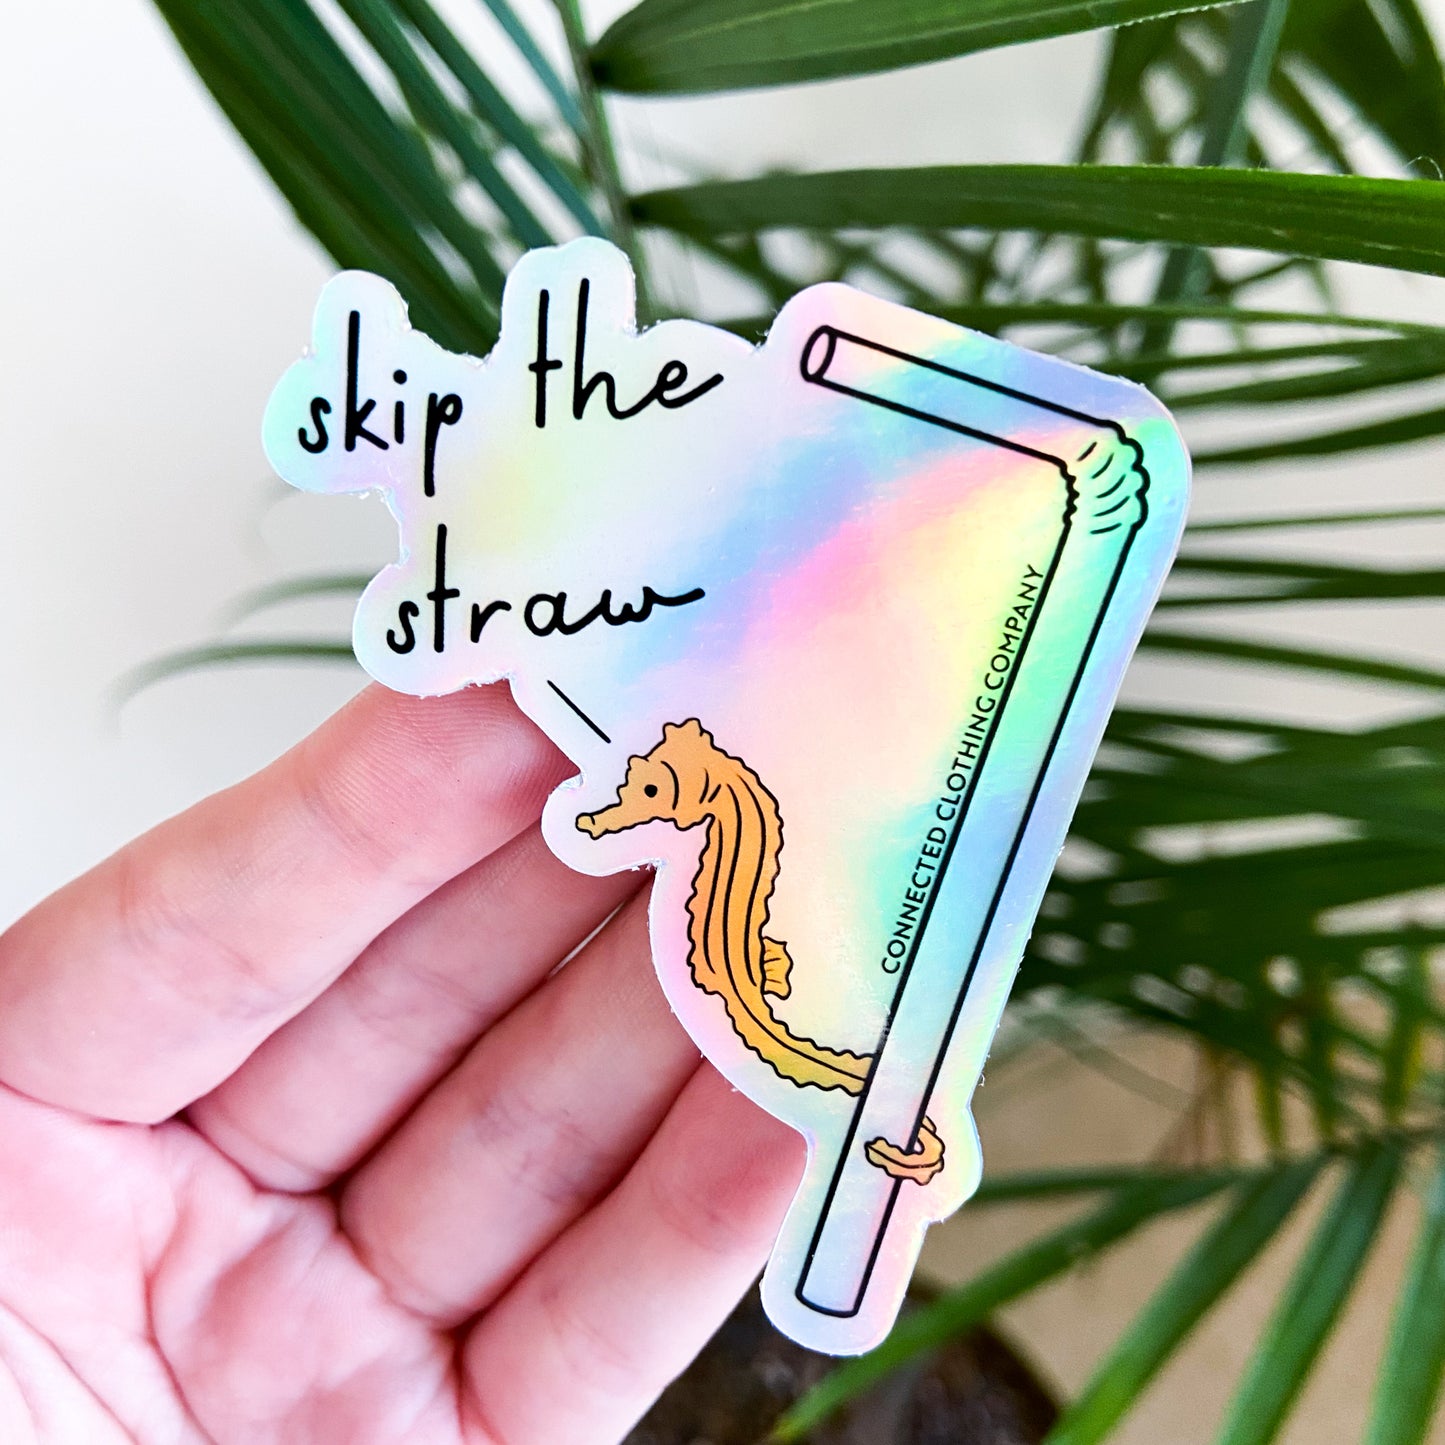 Holographic Skip The Straw Seahorse Sticker (Seahorse holding onto straw while saying skip the straw) - sweetsherriloudesigns - Ethically and Sustainably Made - $1 donated to Mission Blue ocean conservation